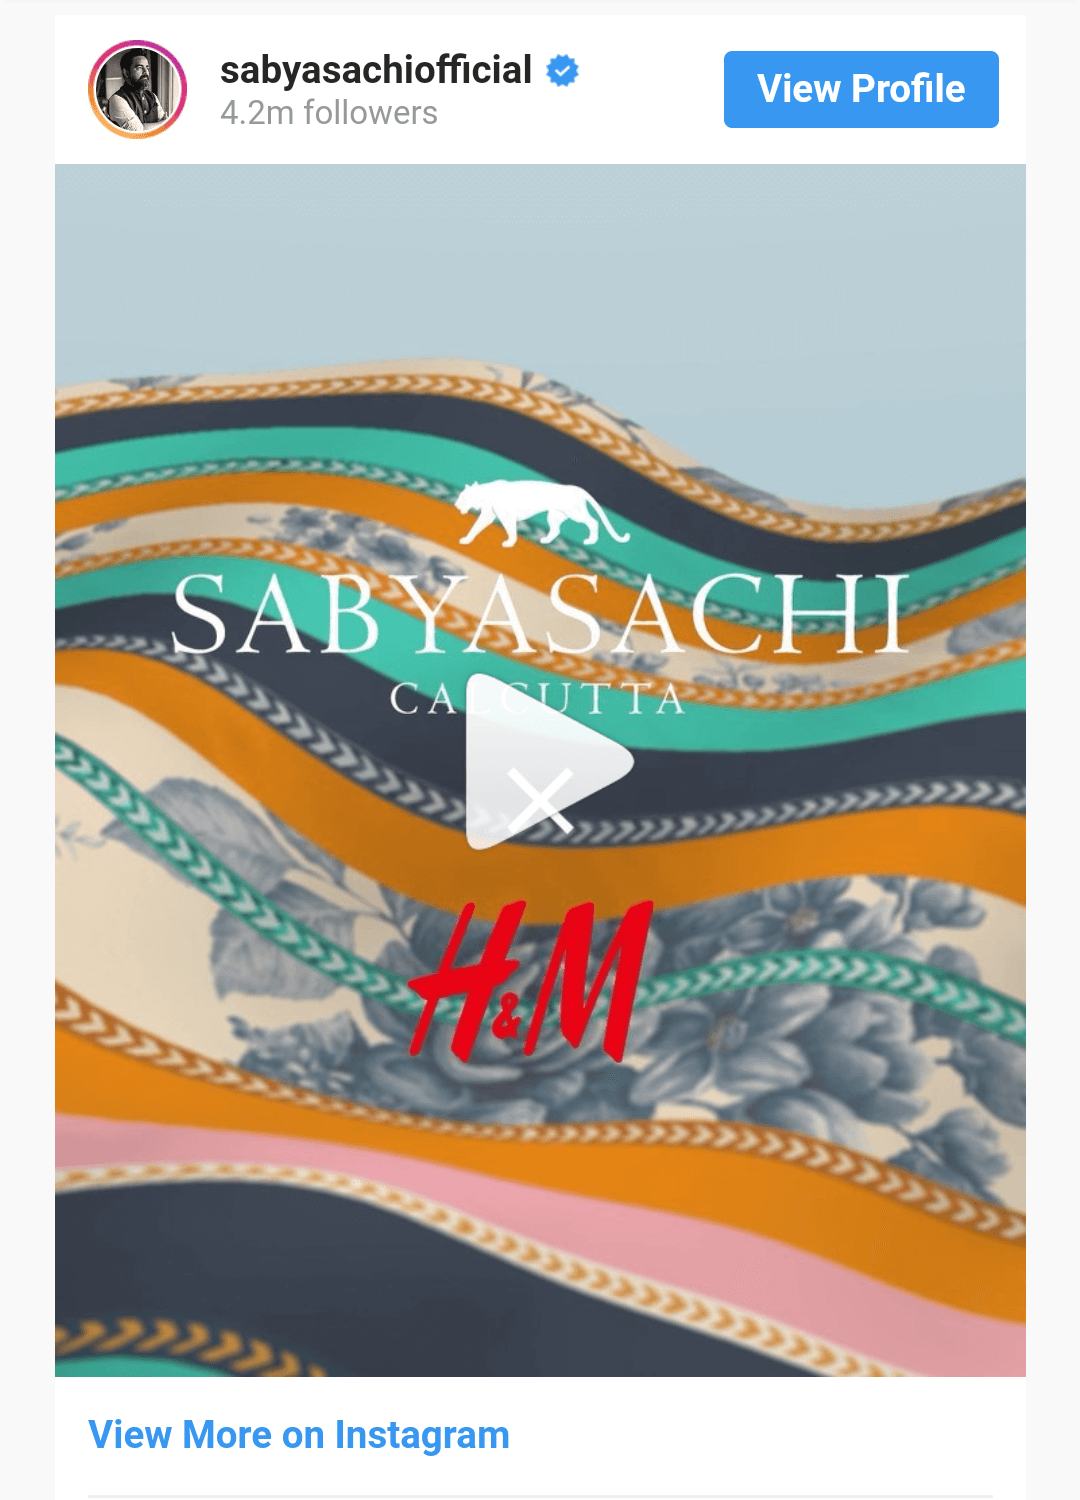 What We're Hoping To See In The Sabyasachi x H&M Collab